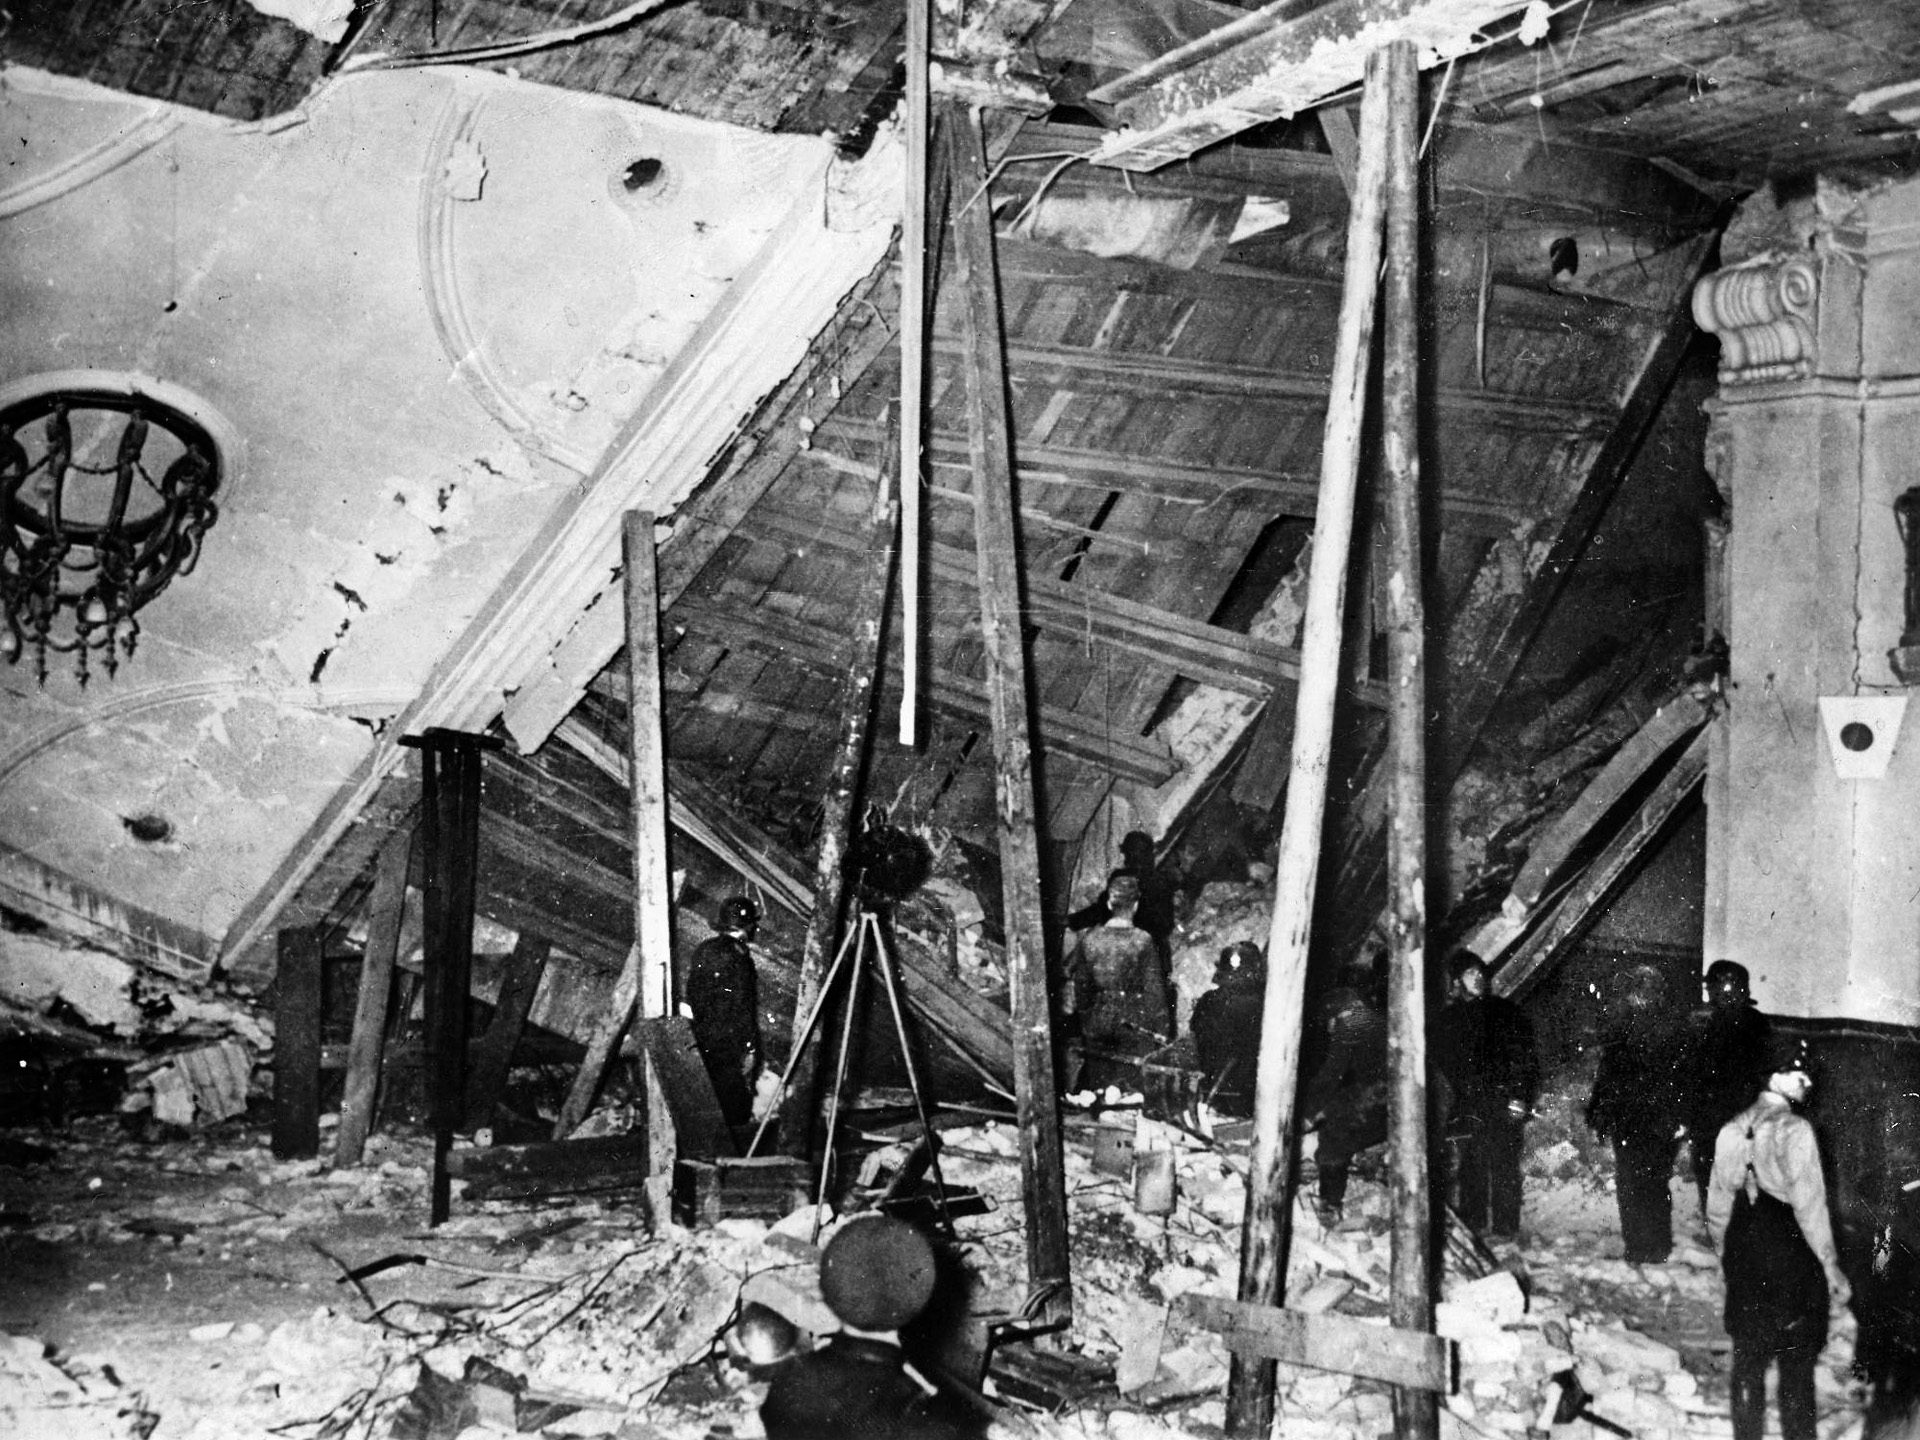 The wreckage of the Burgerbraukeller in Munich bears witness to the explosive power of the bomb planted by would-be Hitler assassin Georg Elser in 1939. The Fuhrer, who departed the beer hall minutes before the blast, blamed the plot on the British.